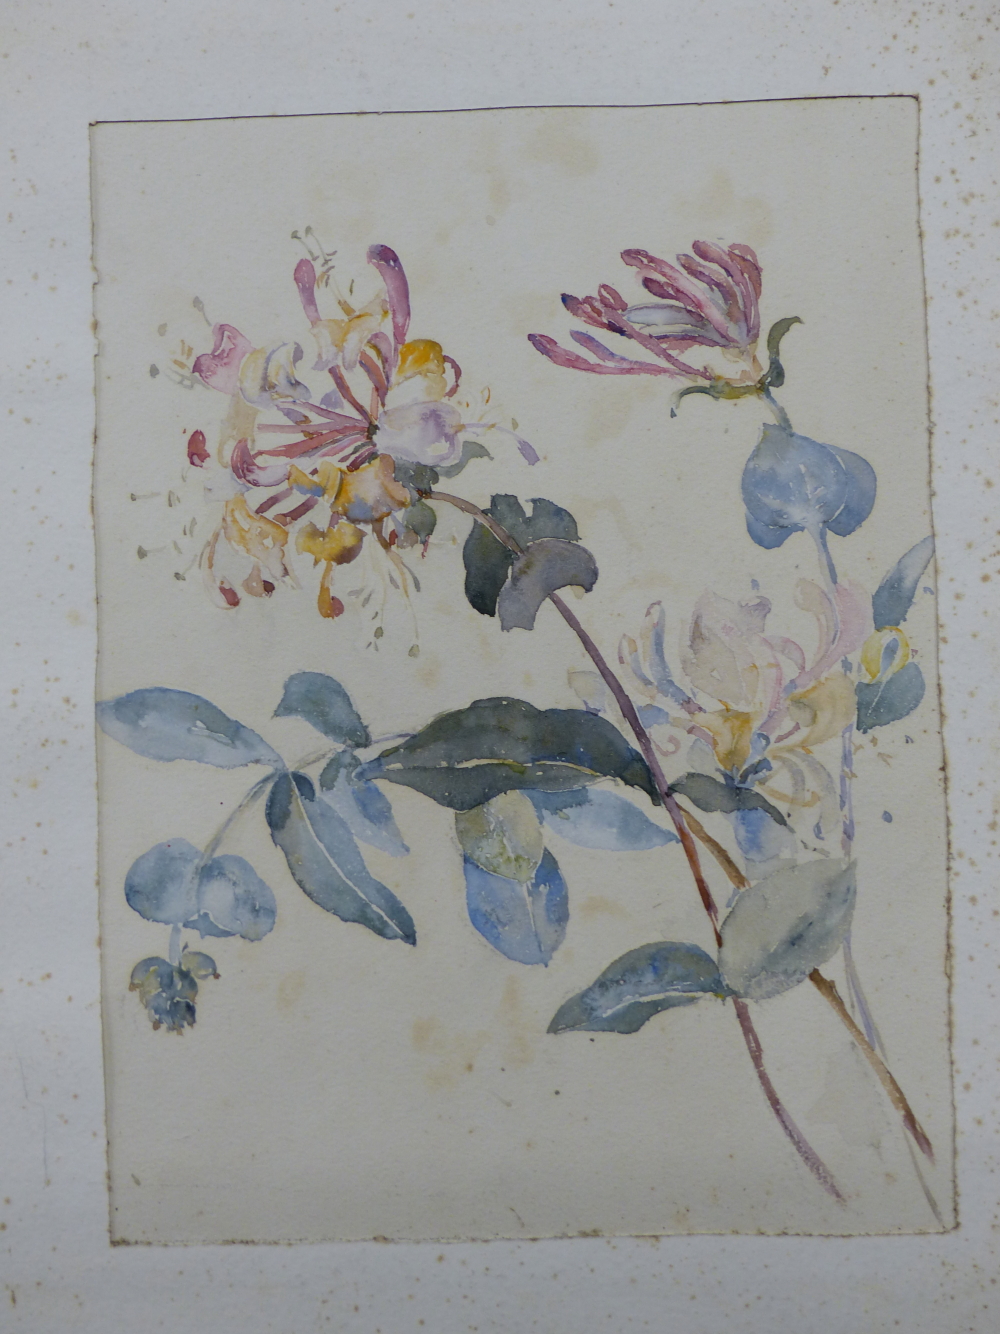 ENGLISH SCHOOL (EARLY 20TH CENTURY), STILL LIFE OF HONEYSUCKLE, WATERCOLOUR, 18 x 24.5cm, TOGETHER